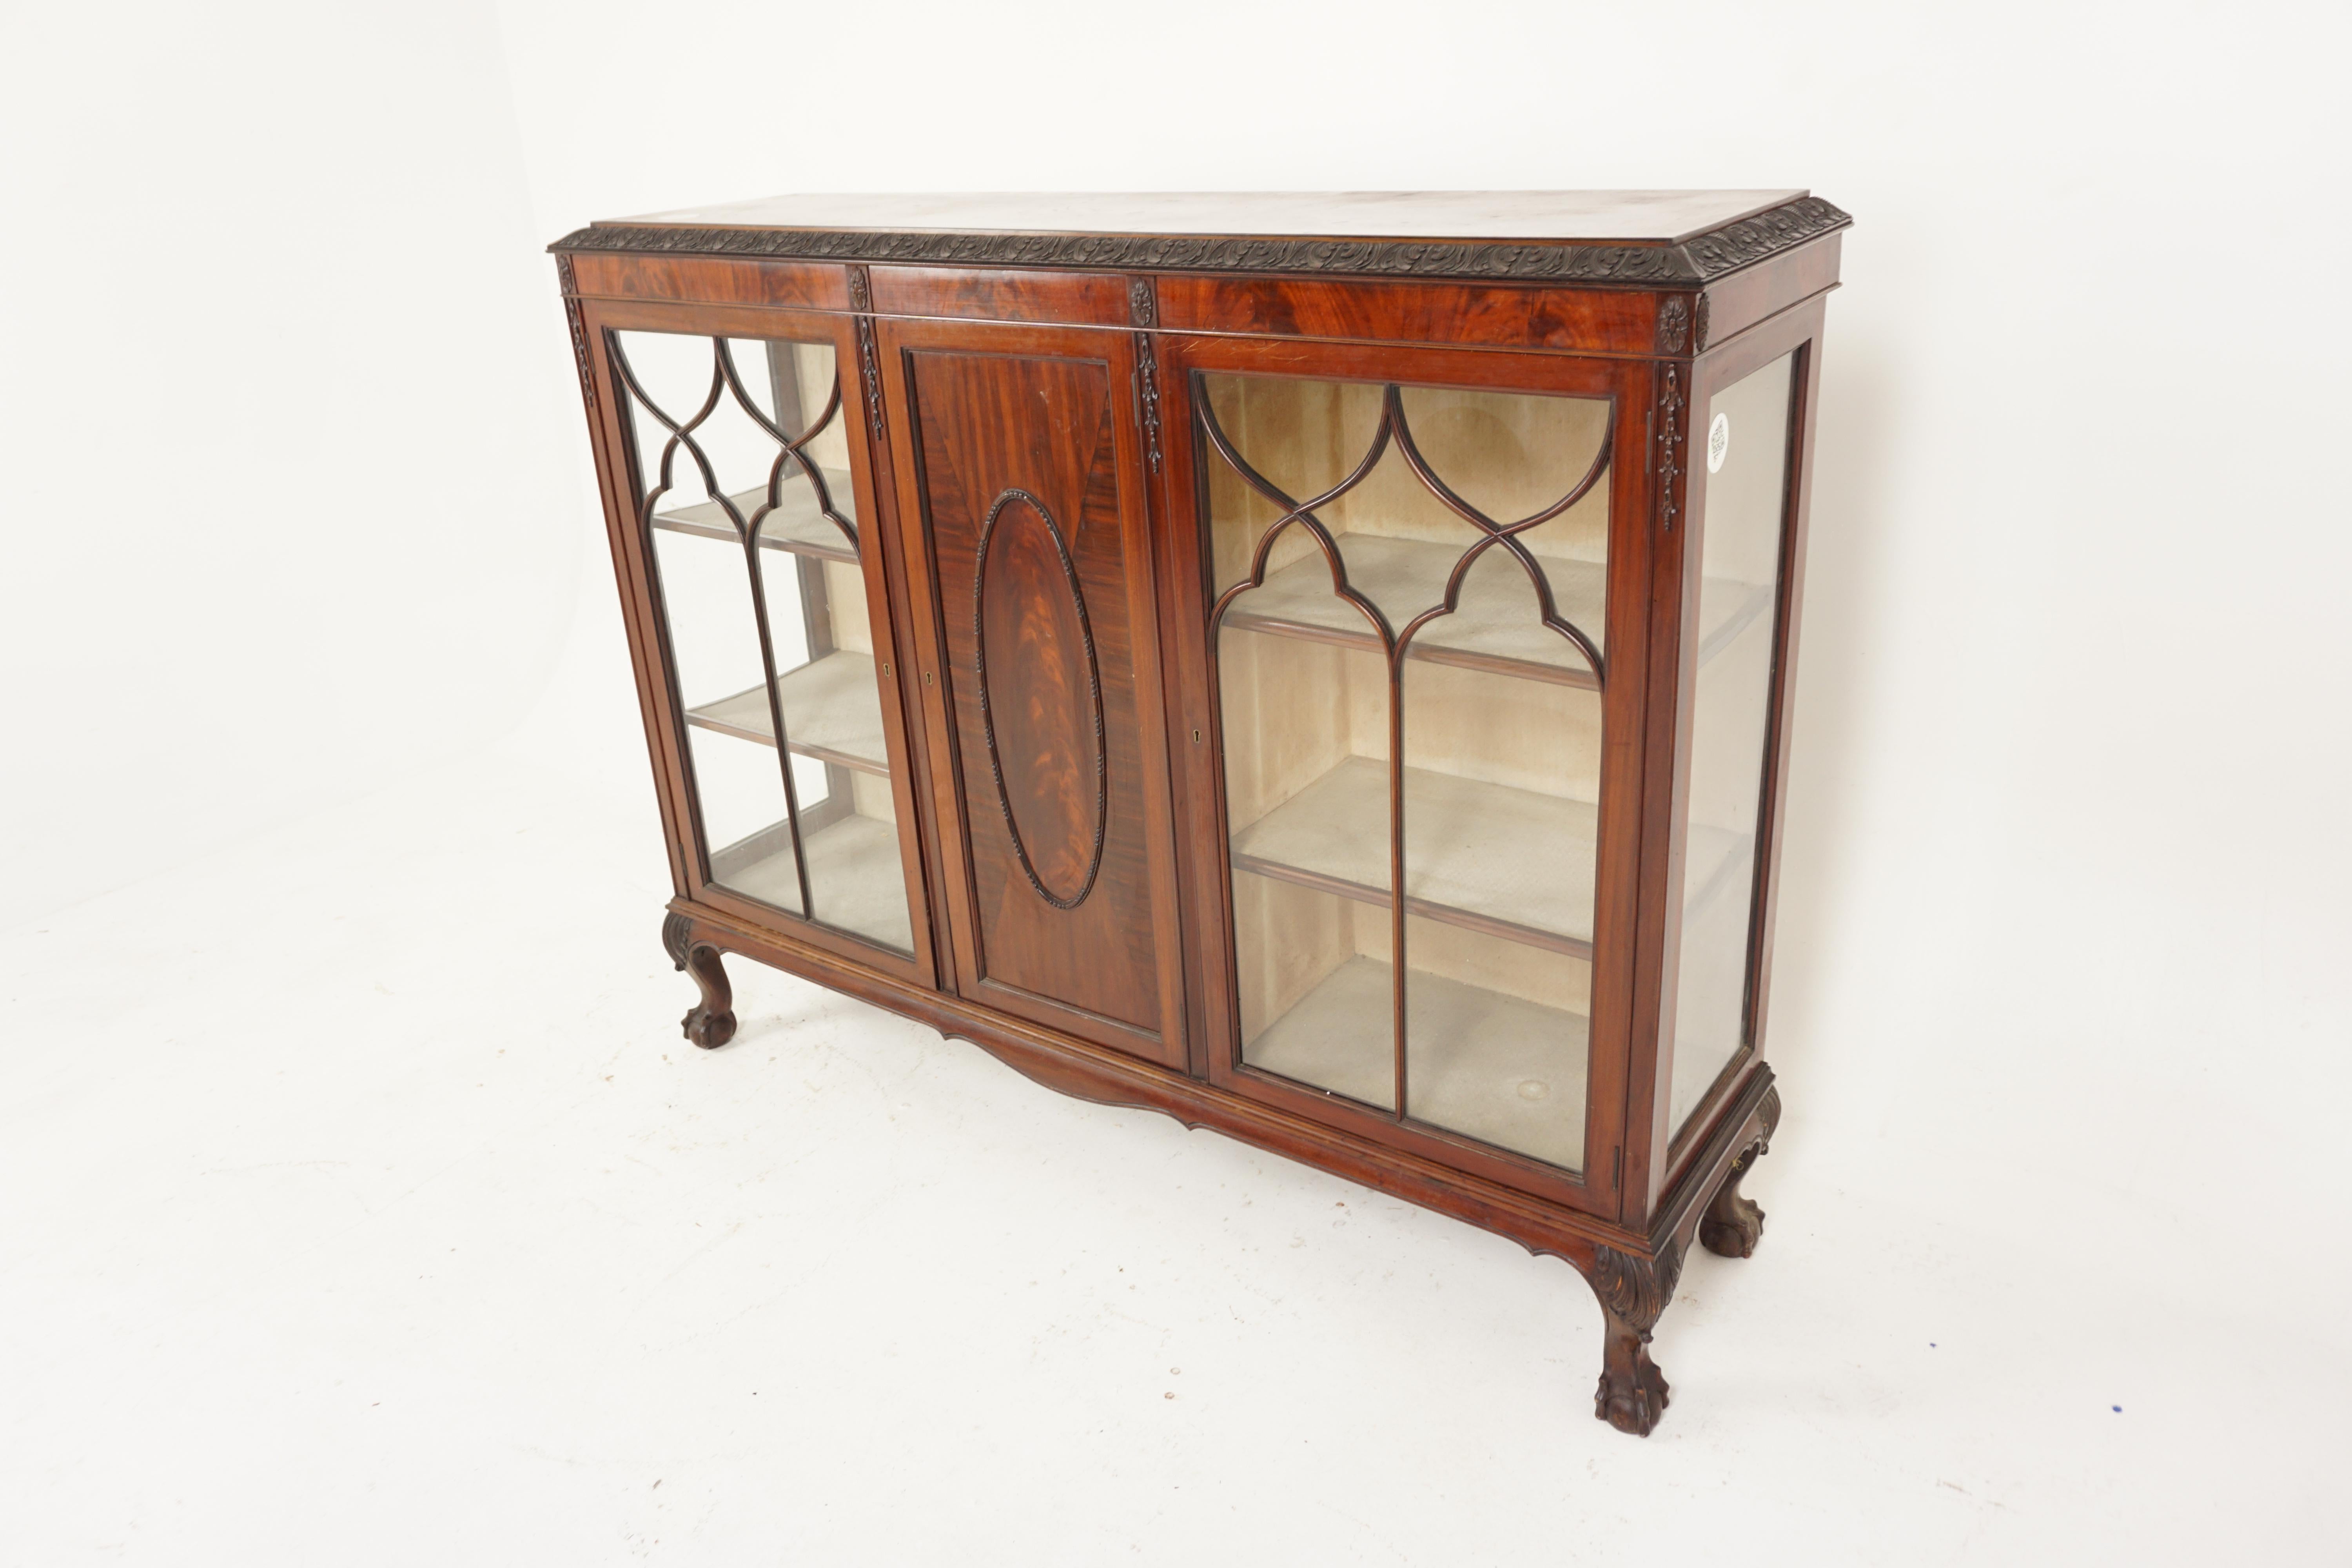 Ant. Walnut Display Case, China Cabinet, Bookcase, Scotland 1910, H788

Scotland 1910
Solid Walnut
Original Finish
Rectangular moulded top
With Classic Carved edge underneath
Solid blank door with moulding to the front and two shelf interior
Flanked